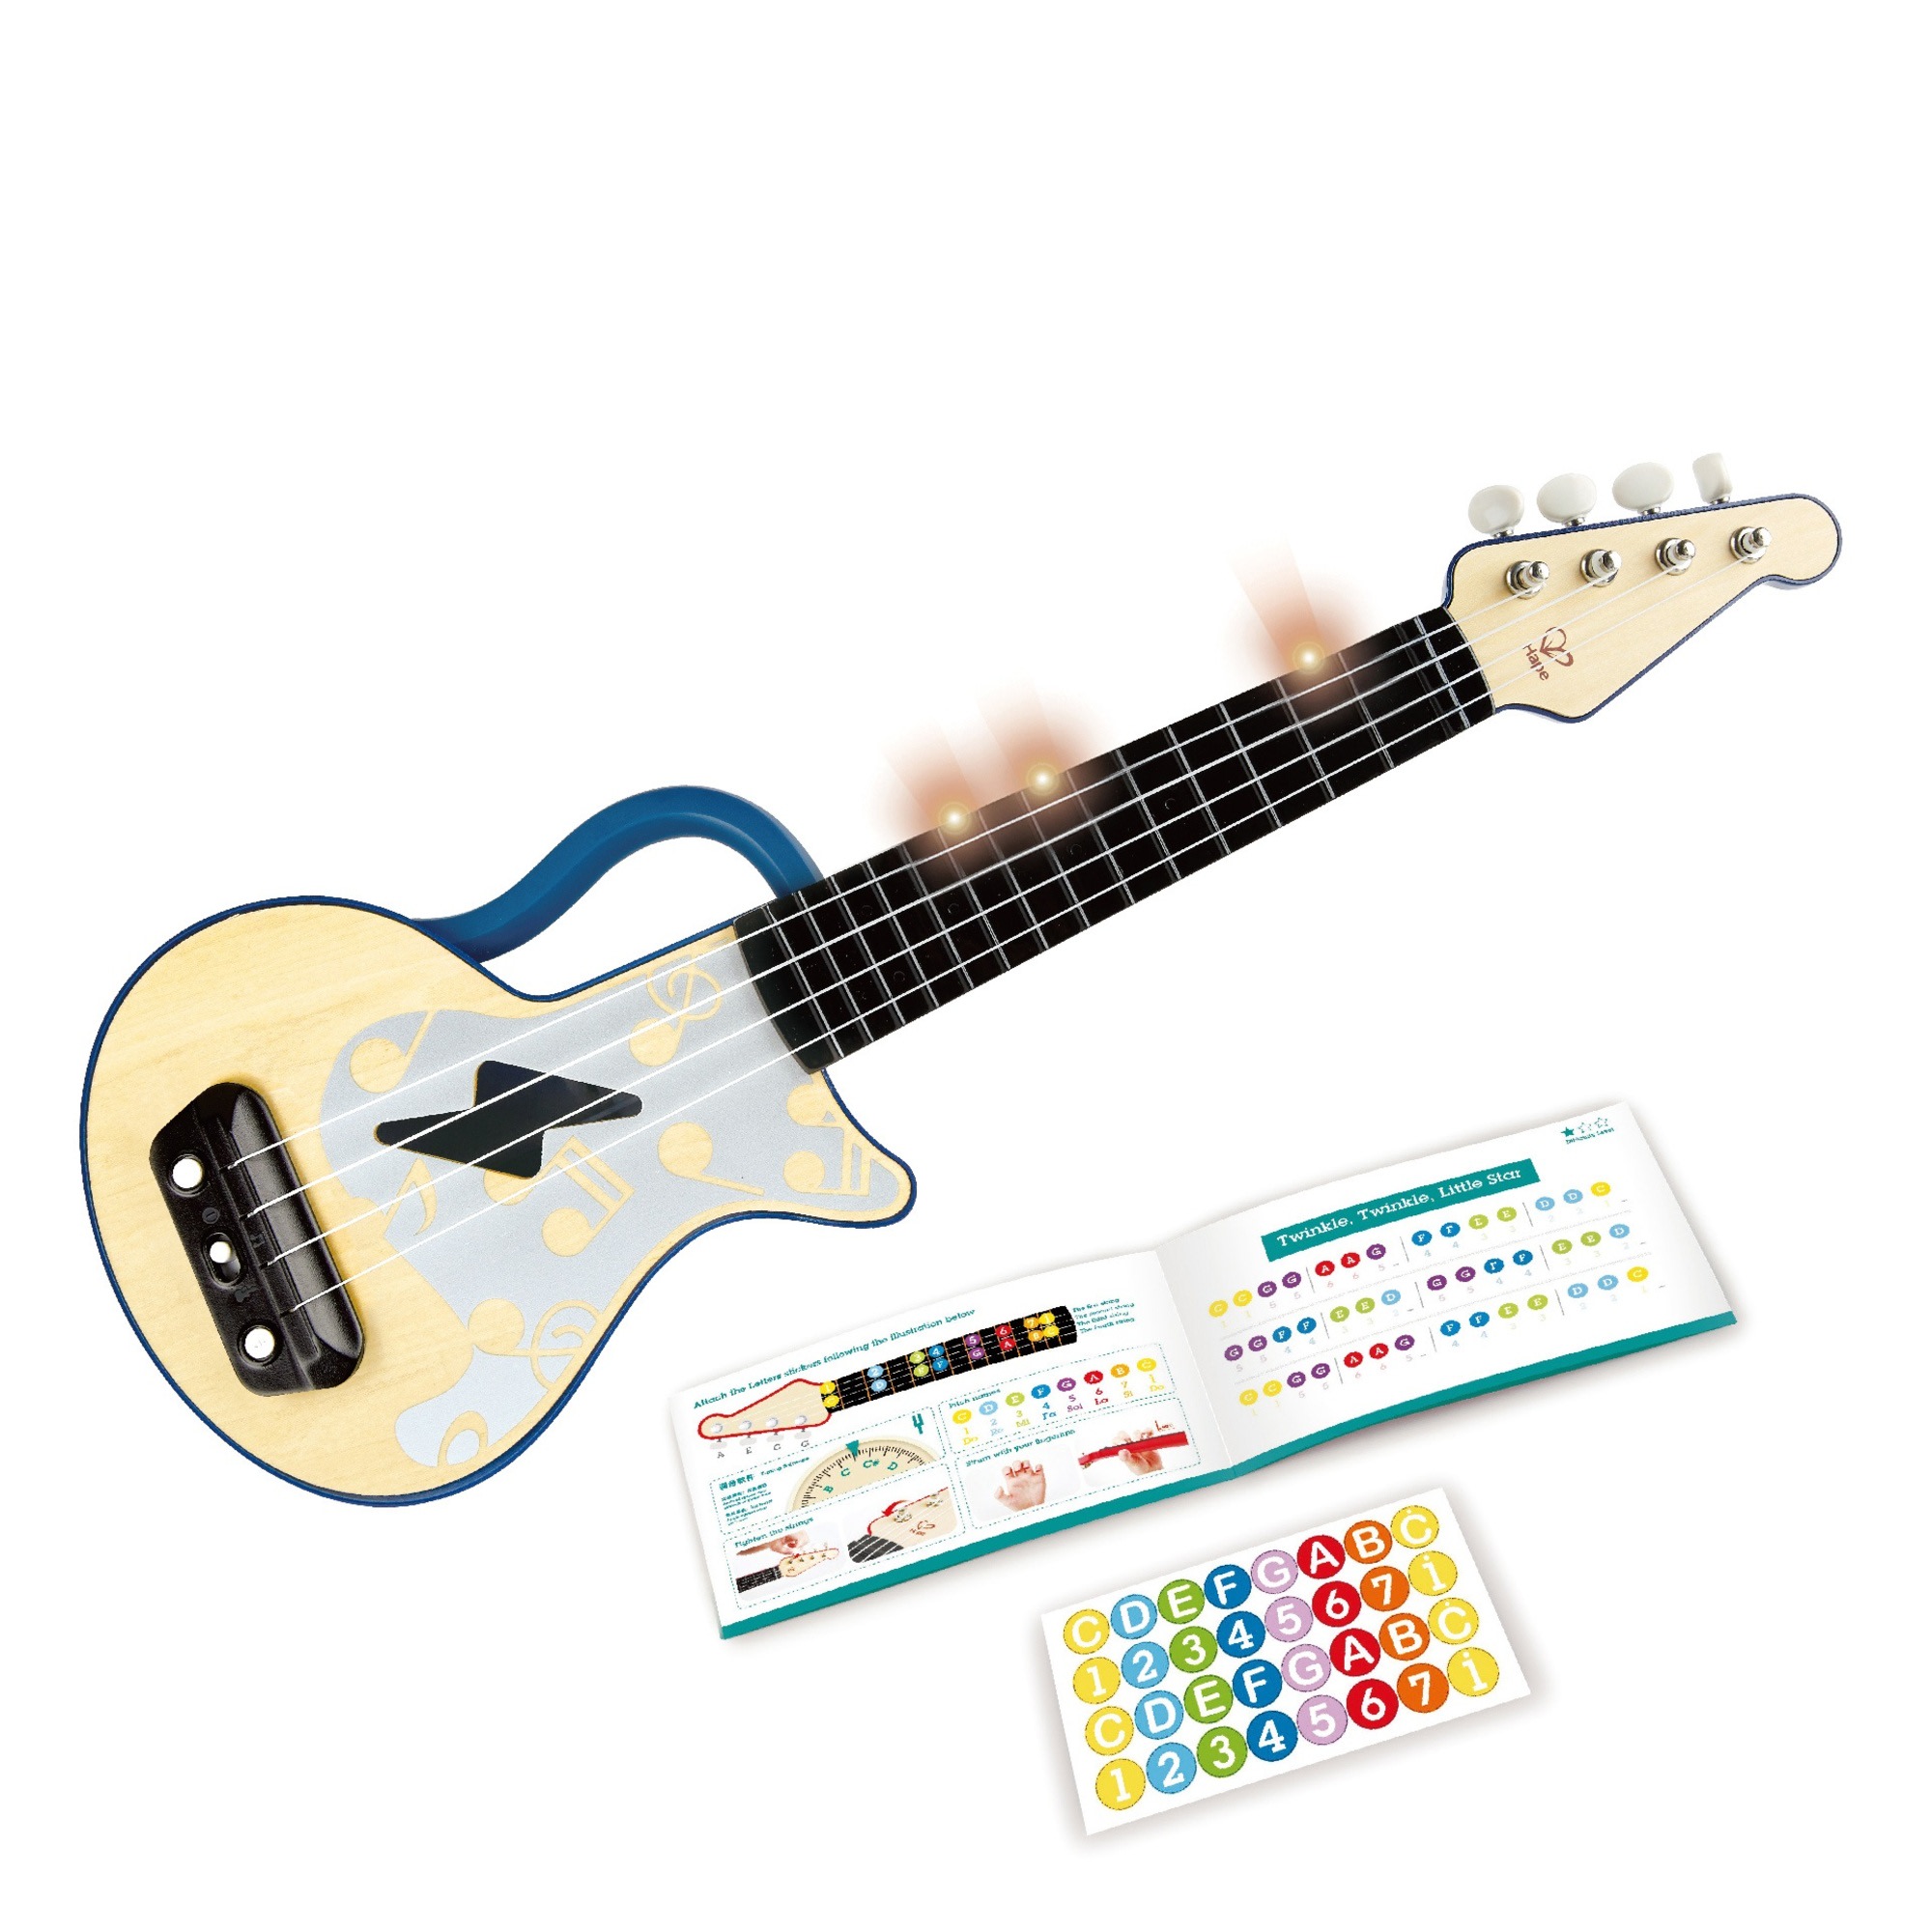 Hape Learn With Lights Kid's Electronic Ukulele in Blue - image 1 of 8